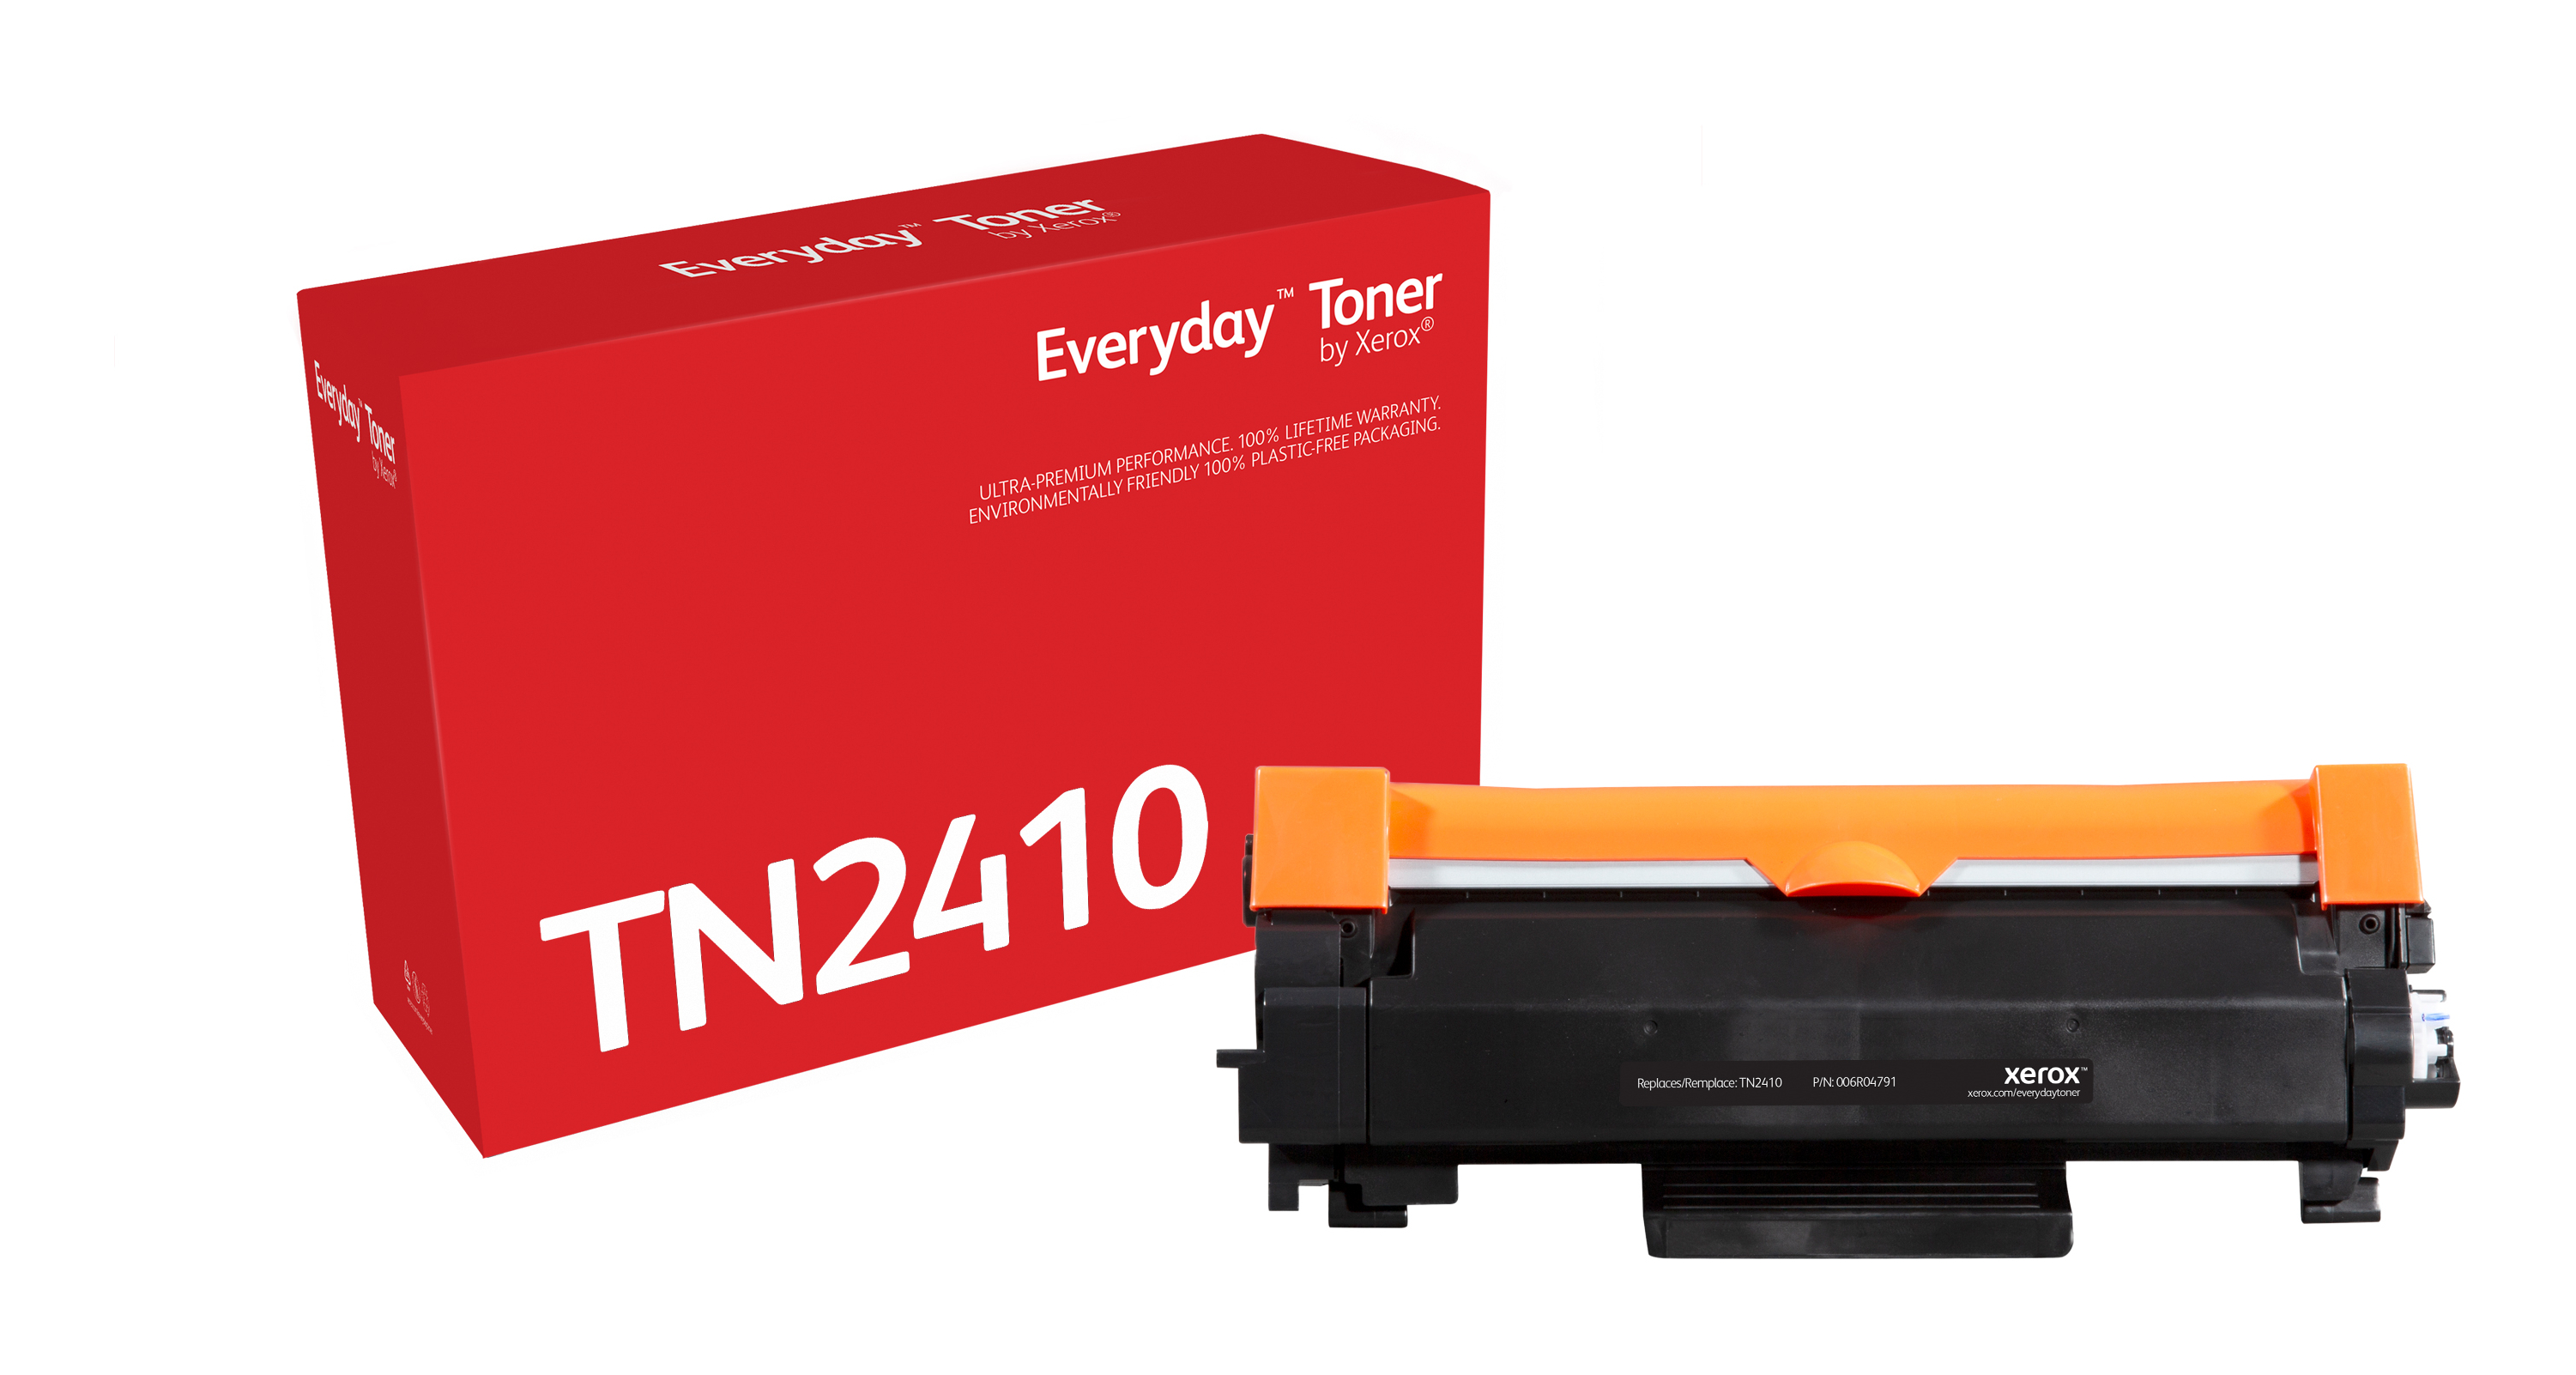 Everyday™ Mono Toner by Xerox compatible with Brother TN2410